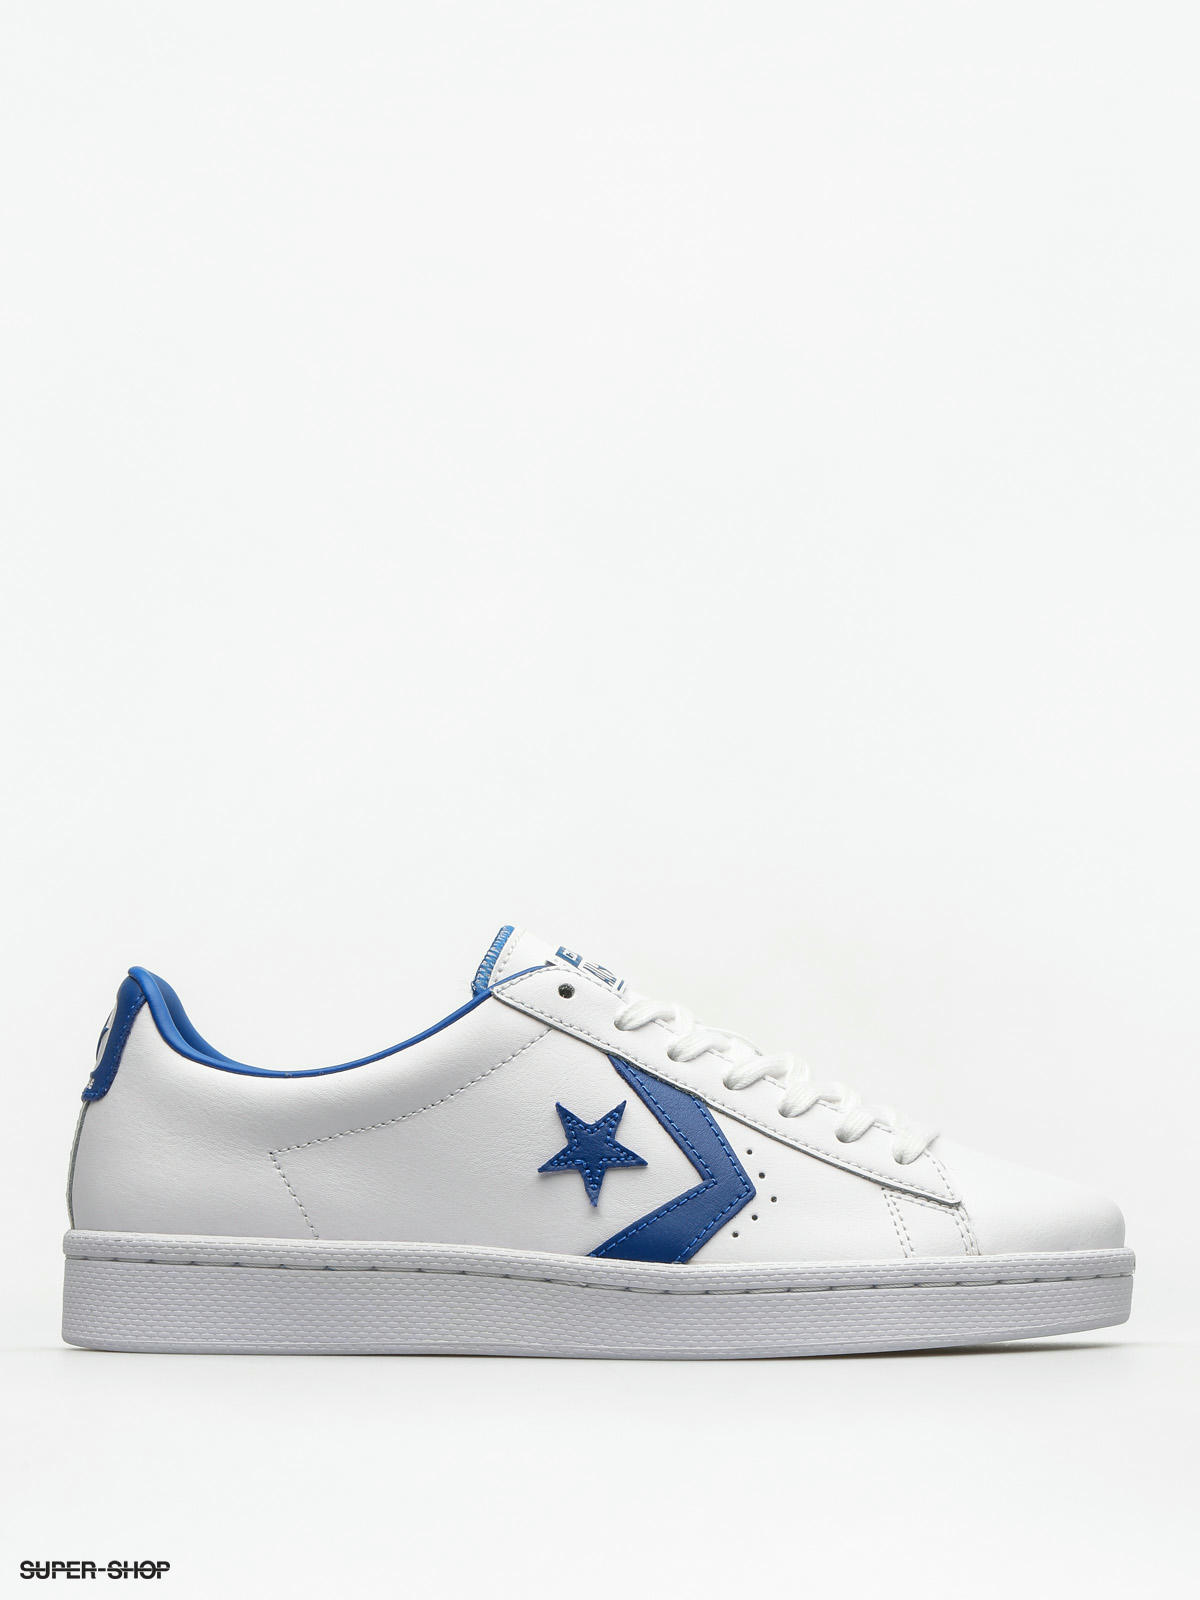 blue and white converse shoes